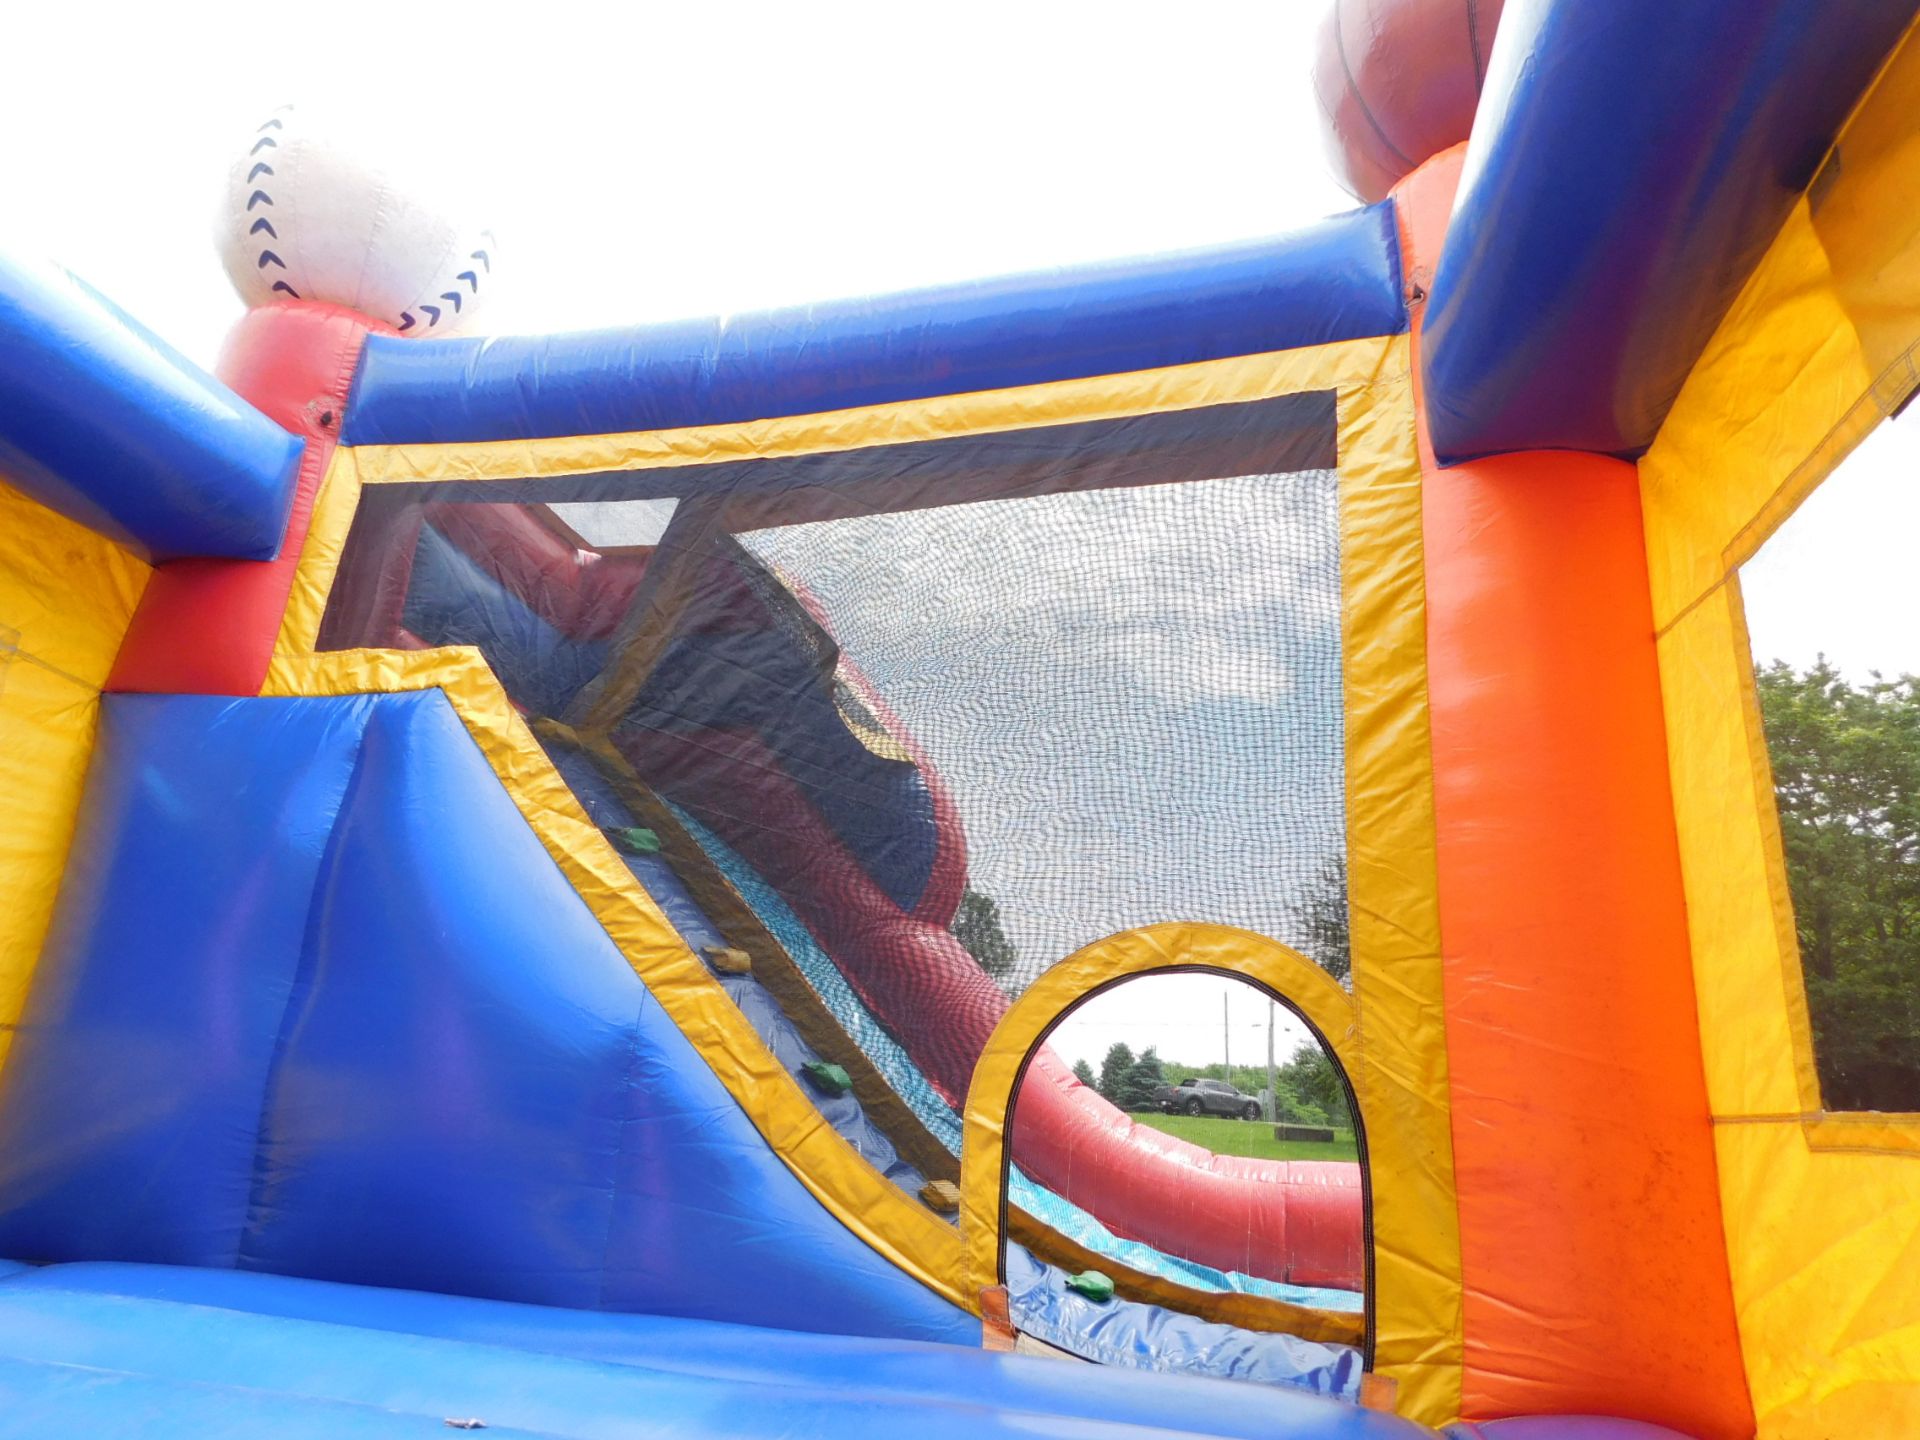 Sports Combo Bounce House w/Slide, 18'WX20'LX14'H, 2 blowers req. - Image 15 of 19